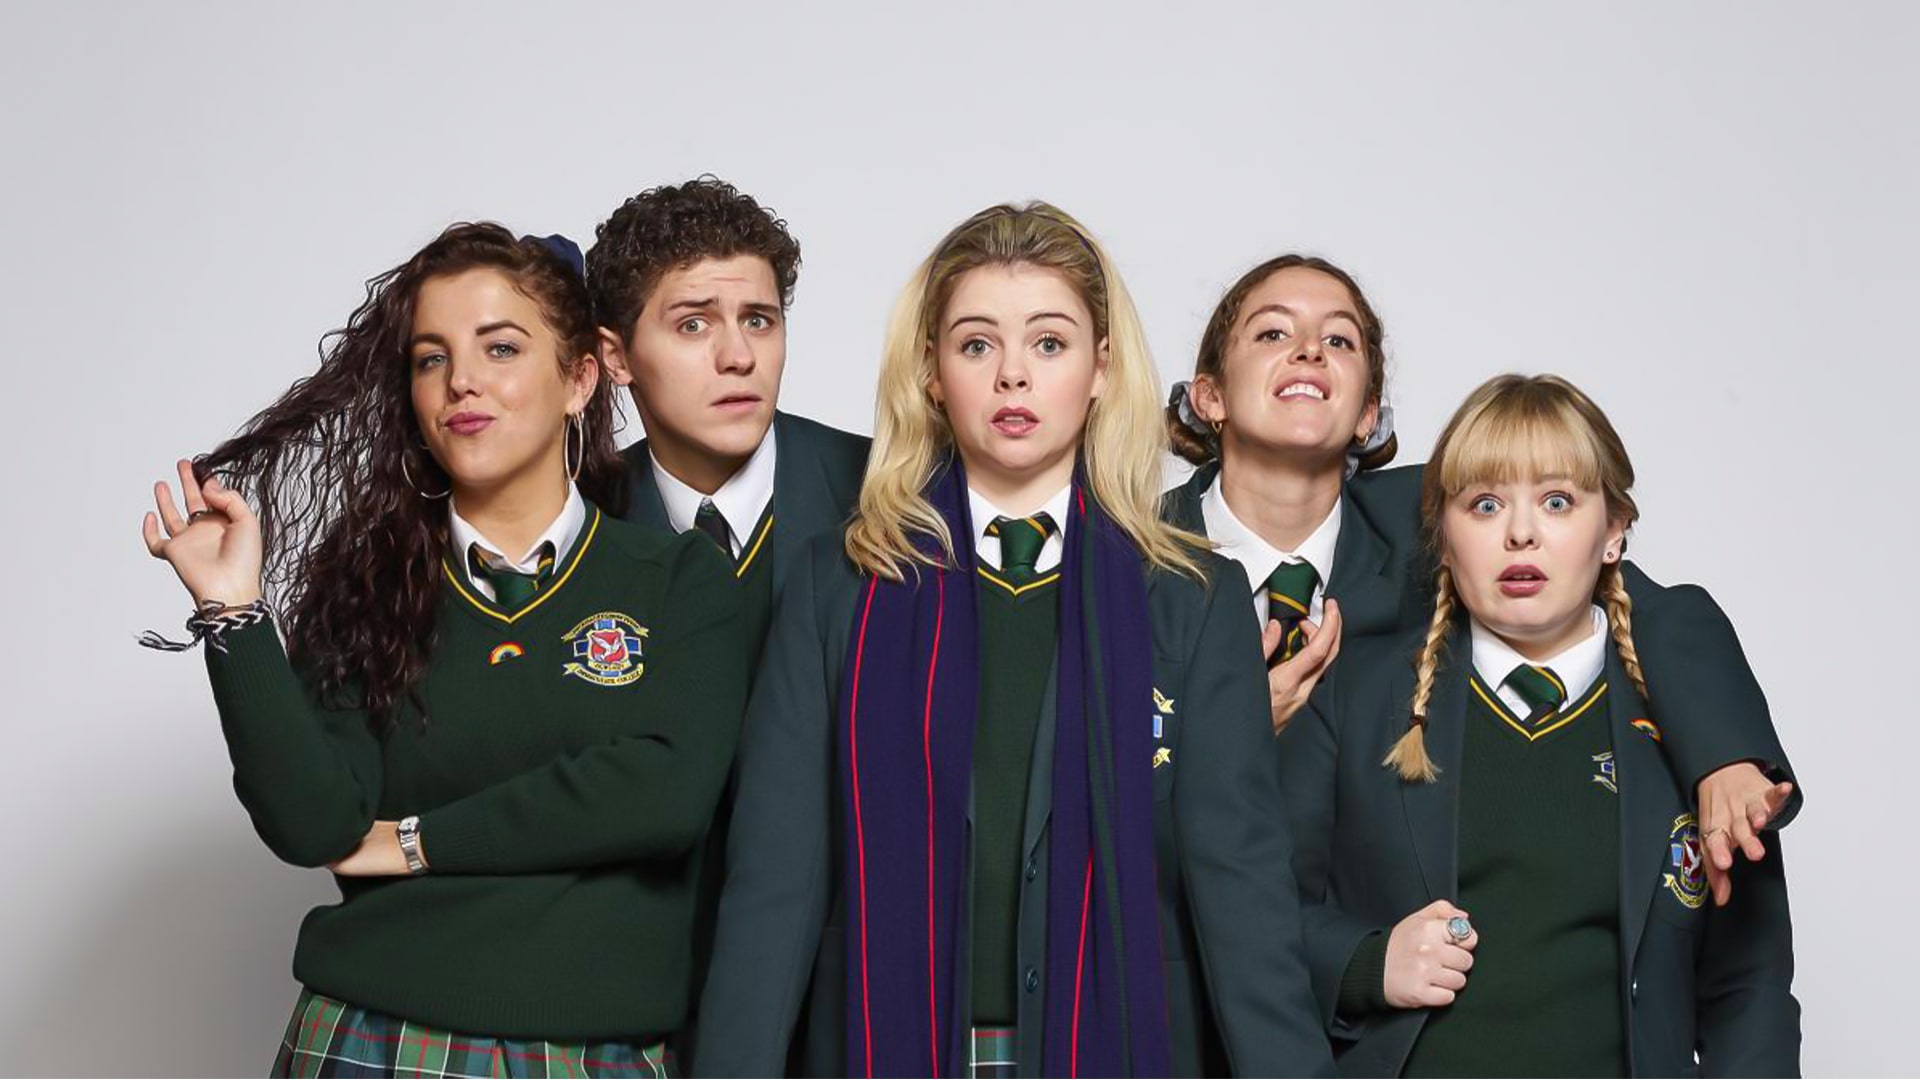 Derry Girls Facts - 20 Derry Girls Facts You Haven’t Heard Before